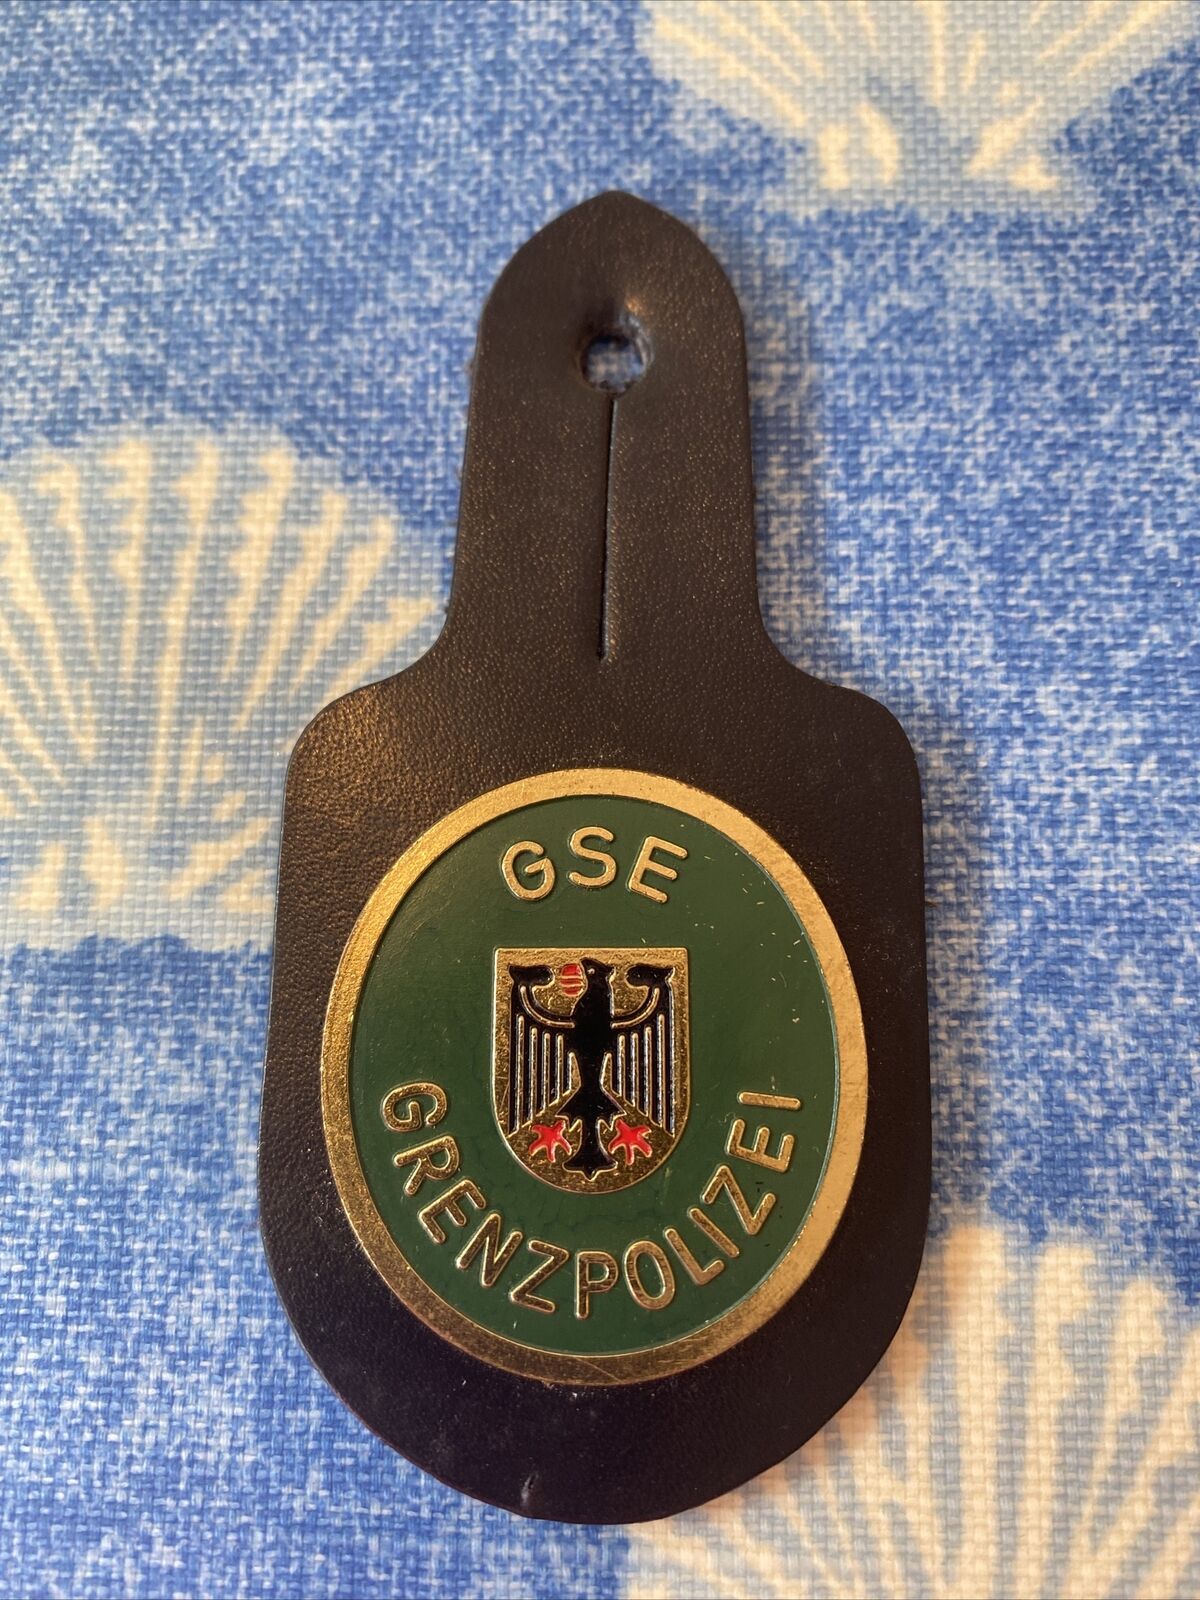 Vintage German Police Uniform Badge / Patch. Metal And Leather. GSE GRENZPOLIZEI